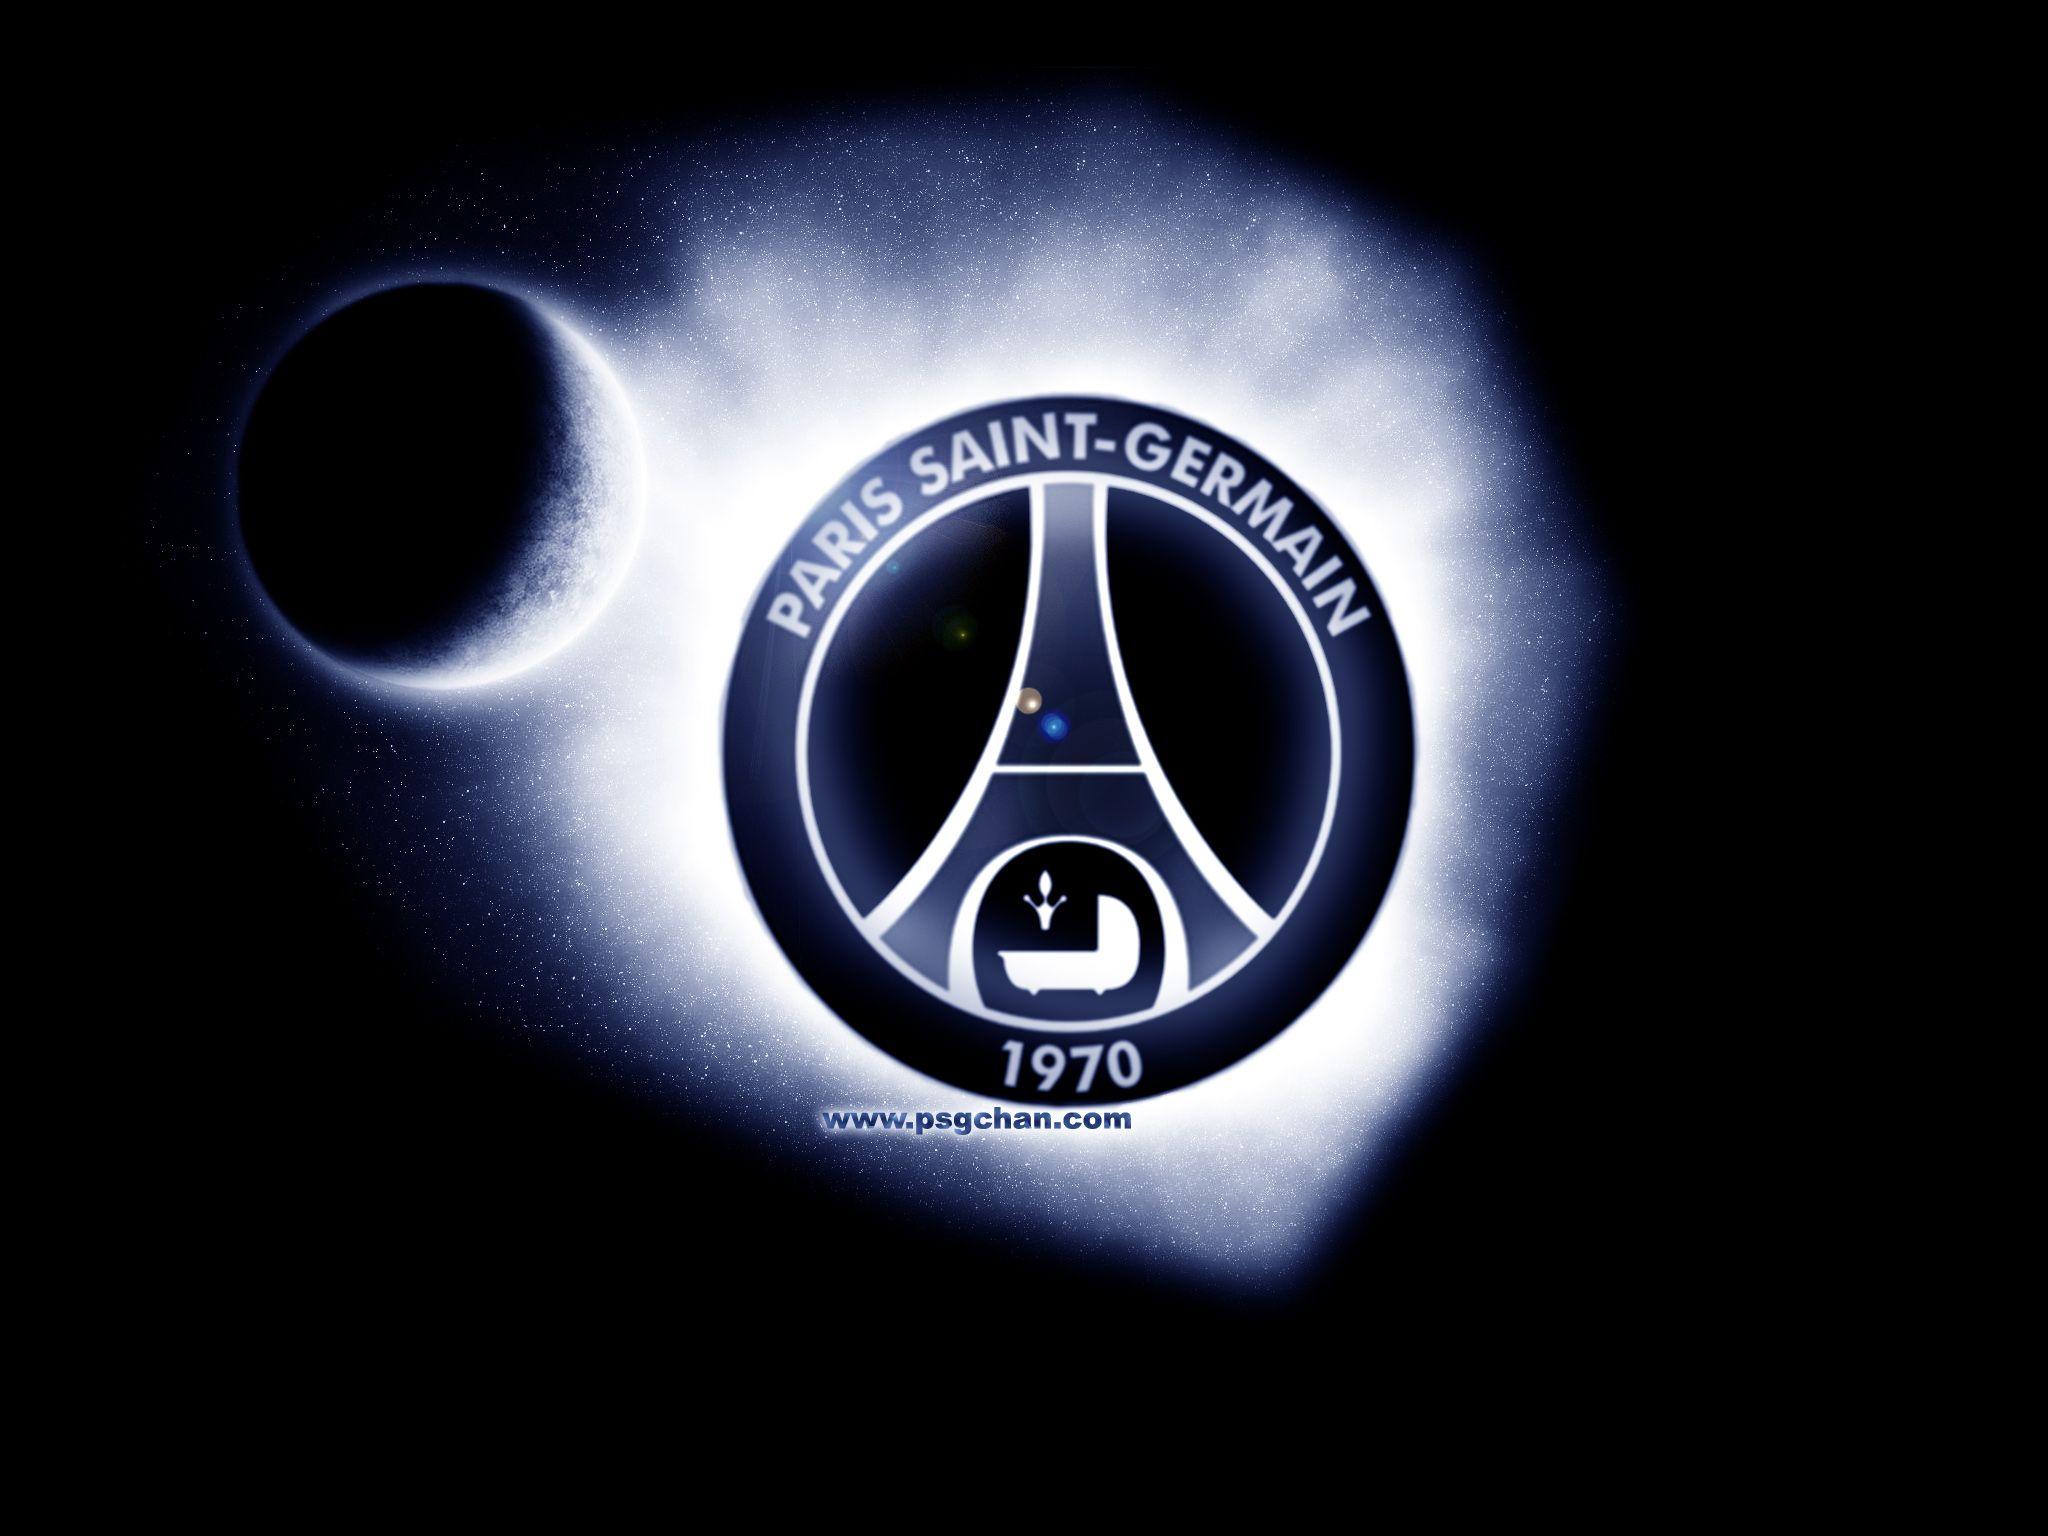 PSG, Logos and Wallpapers